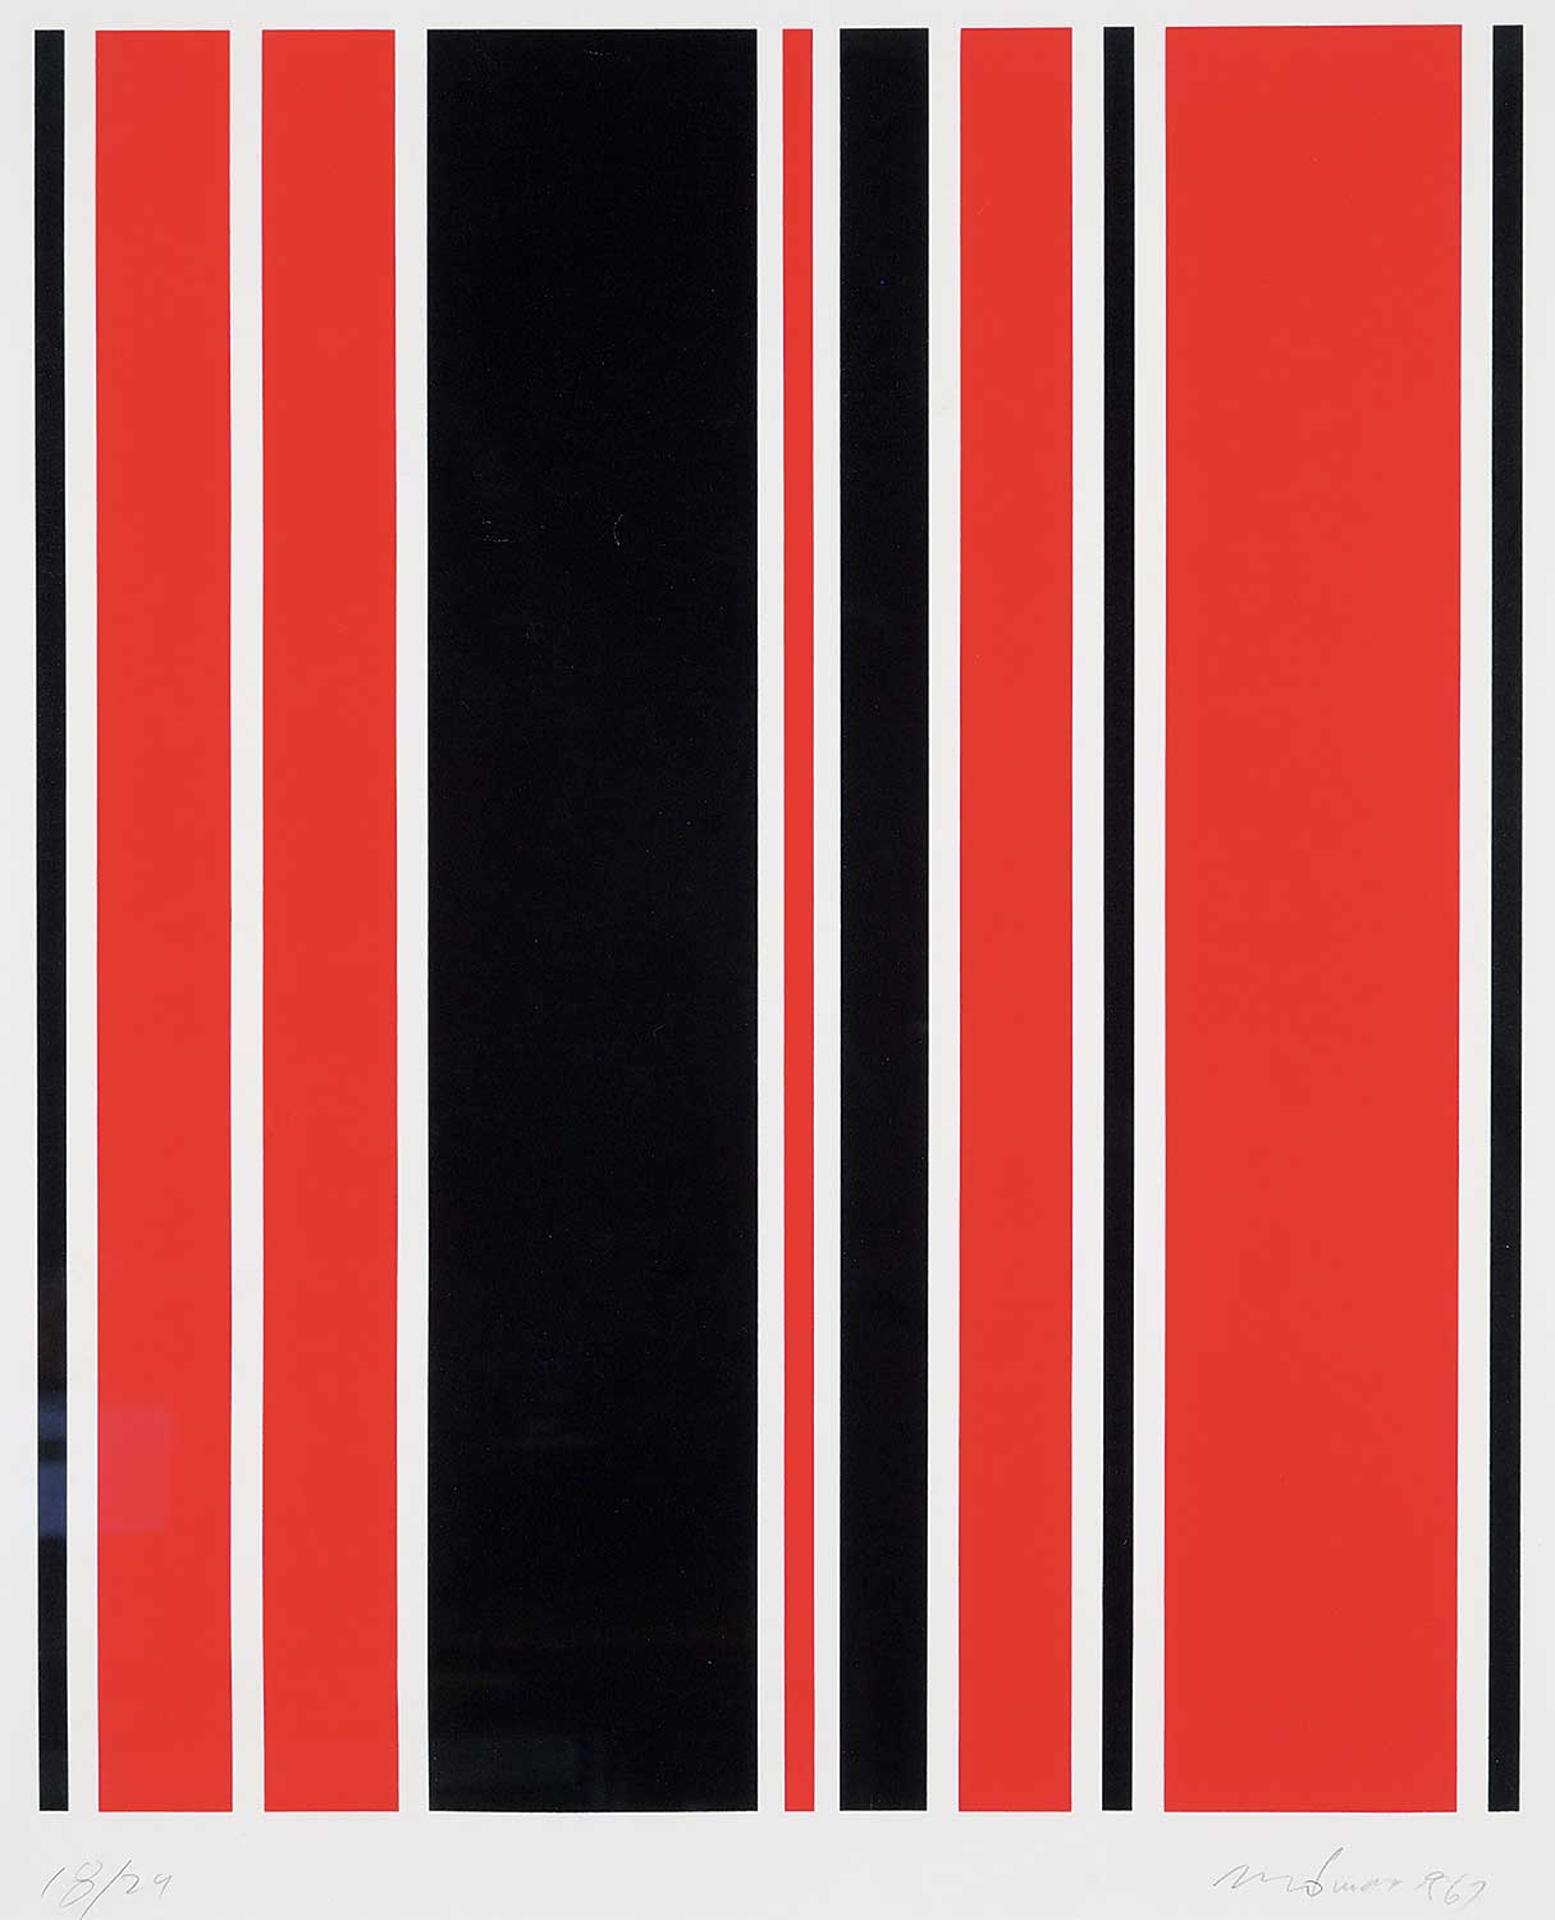 Guido Molinari (1933-2004) - Untitled - Vertical Red and Black  #18/24